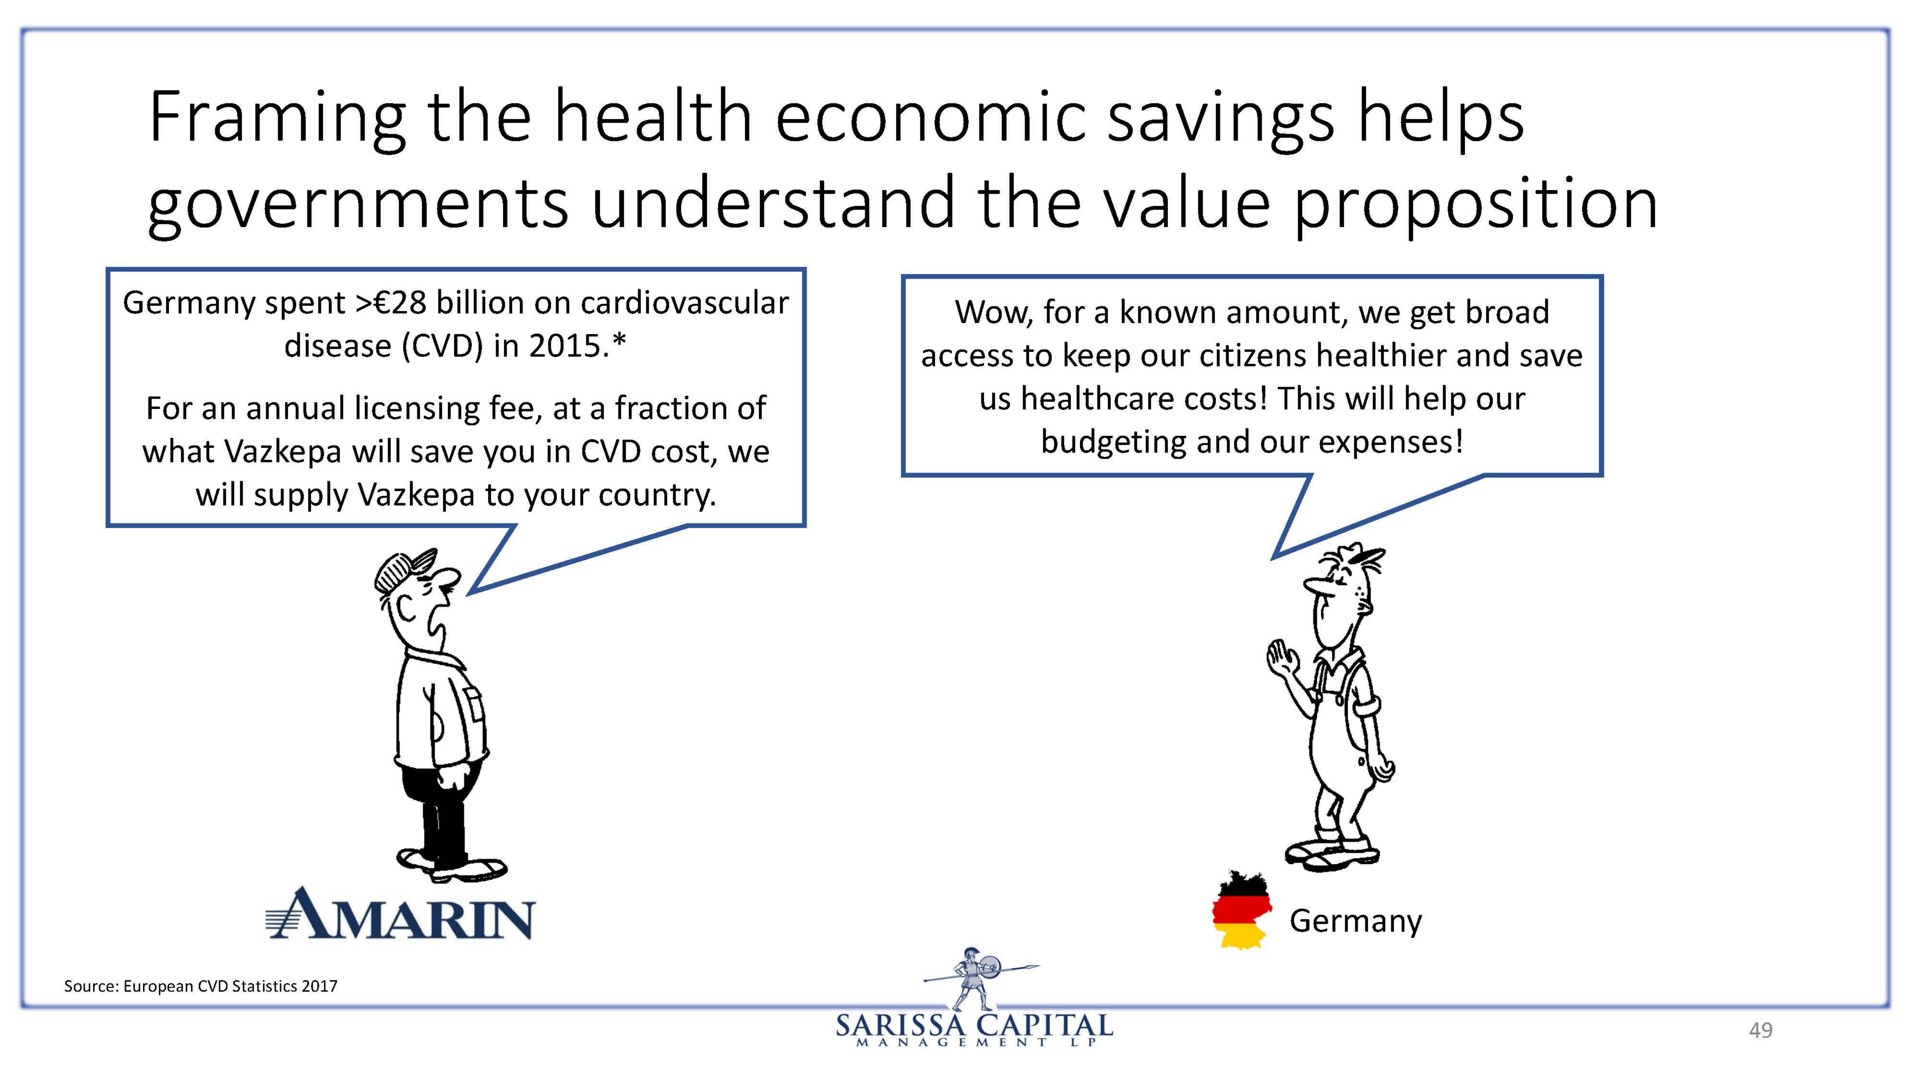 framing the health economic savings helps governments understand the value proposition | Sarissa Capital